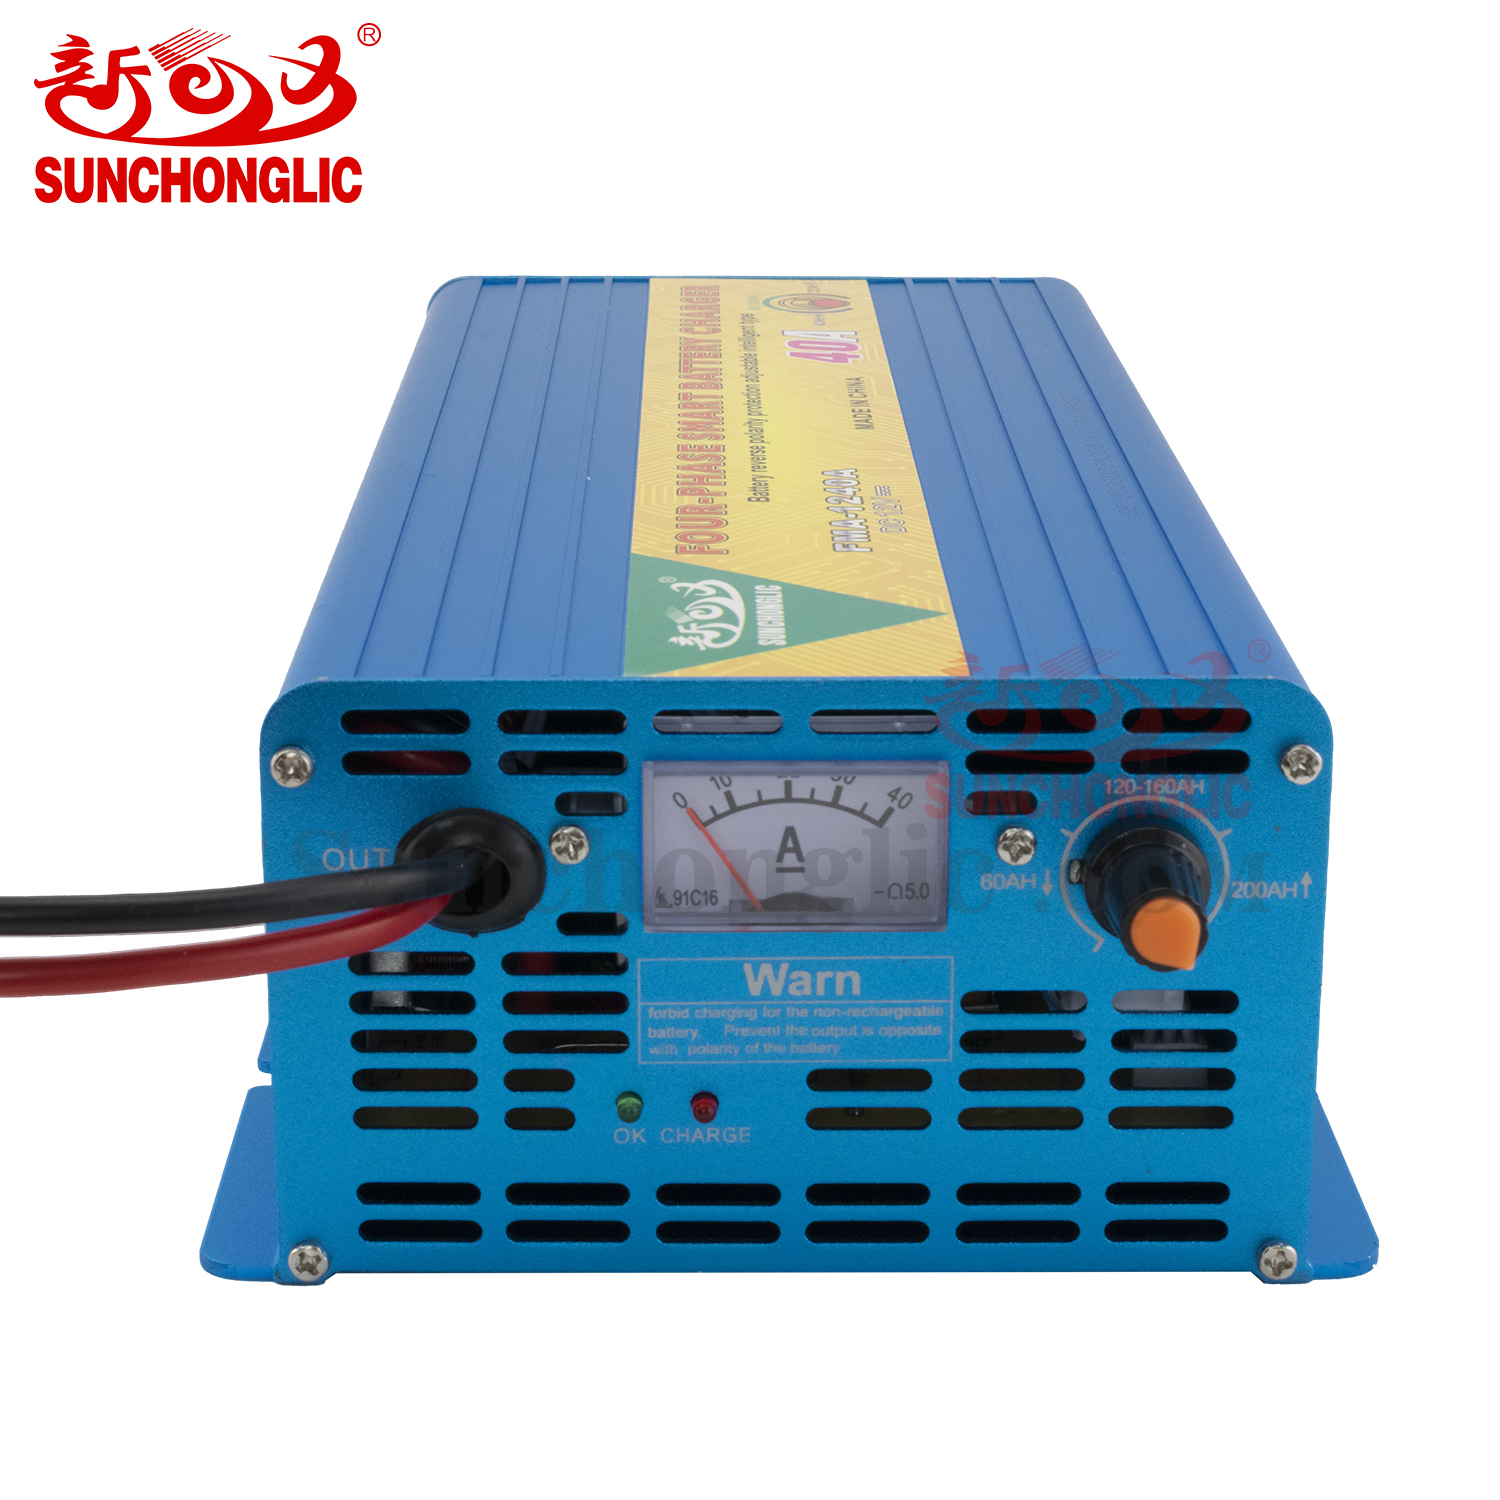 AGM/GEL Battery Charger - FMA-1240A